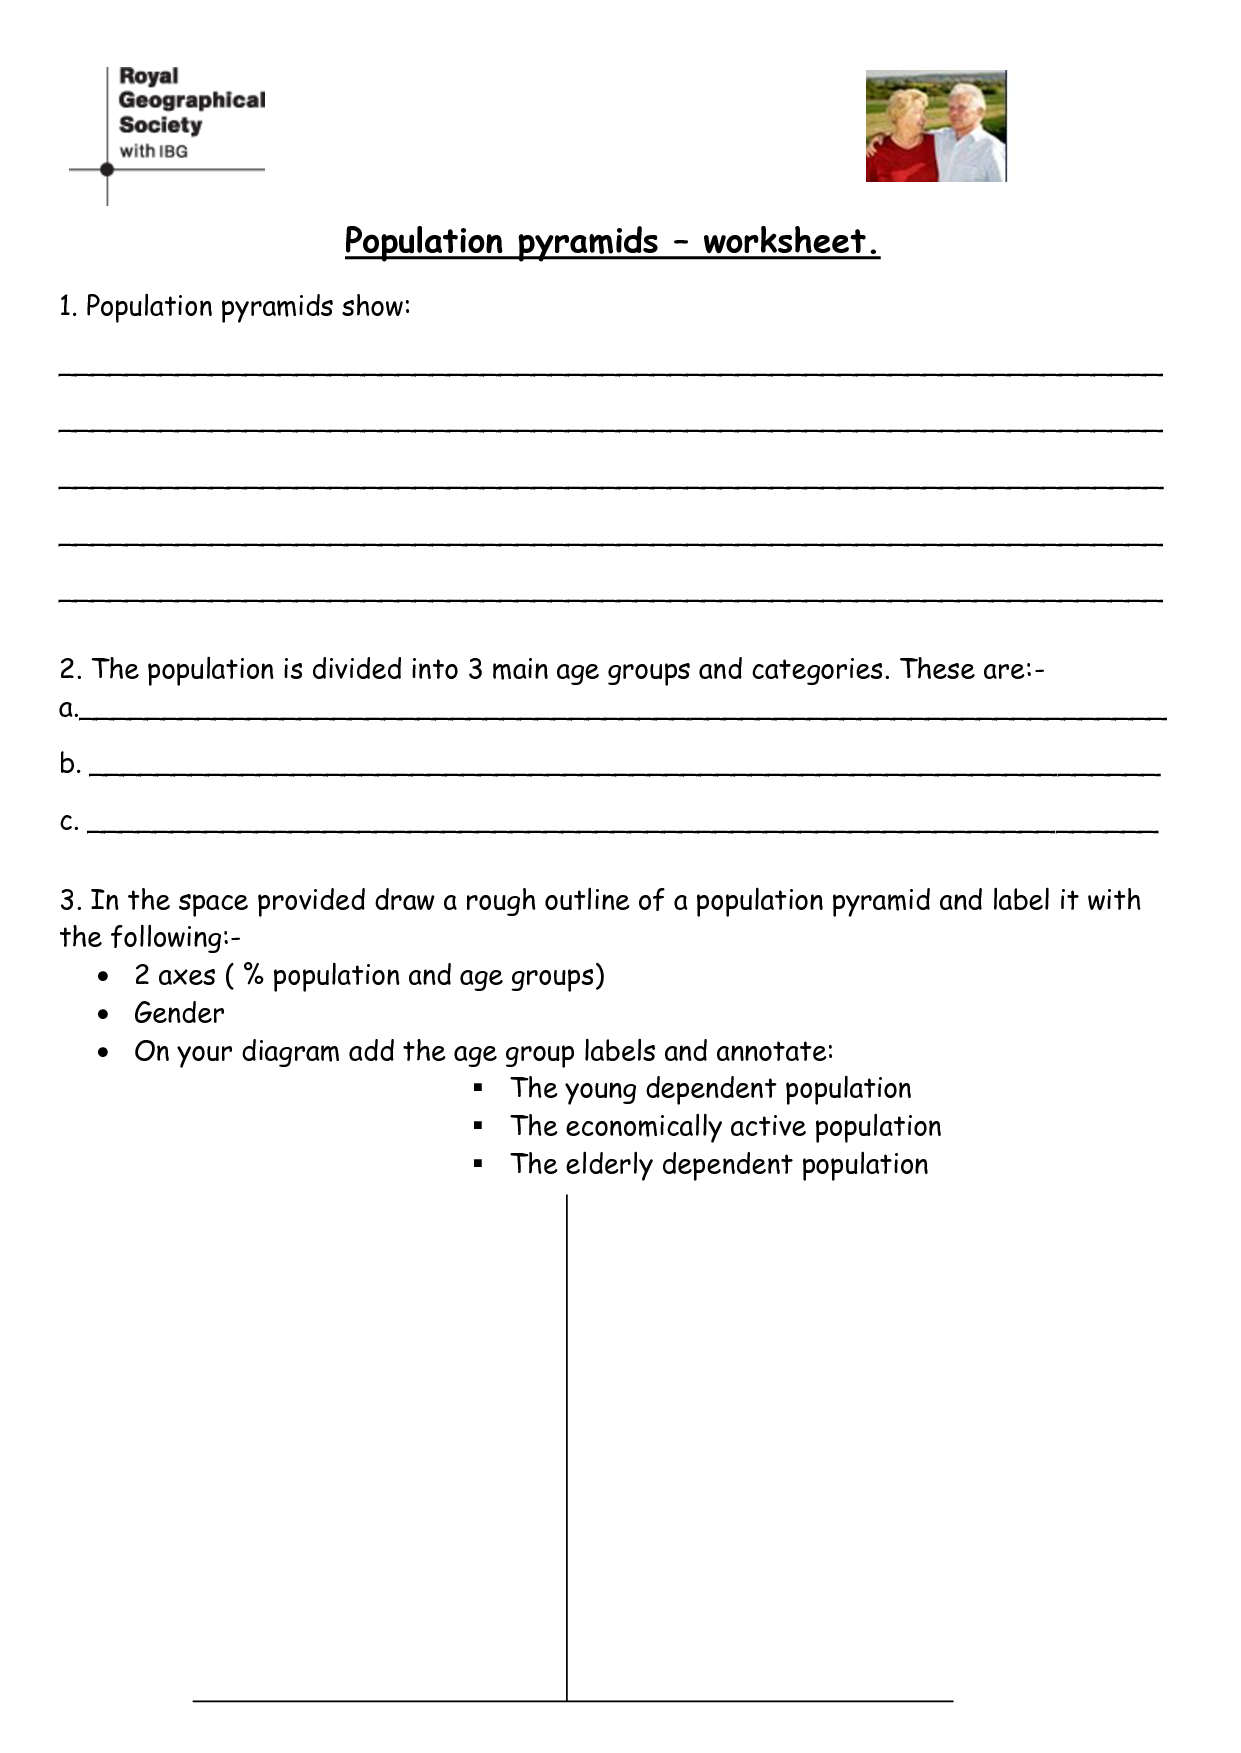 9-best-images-of-biomass-energy-pyramid-labeled-worksheet-producers-and-consumers-worksheet